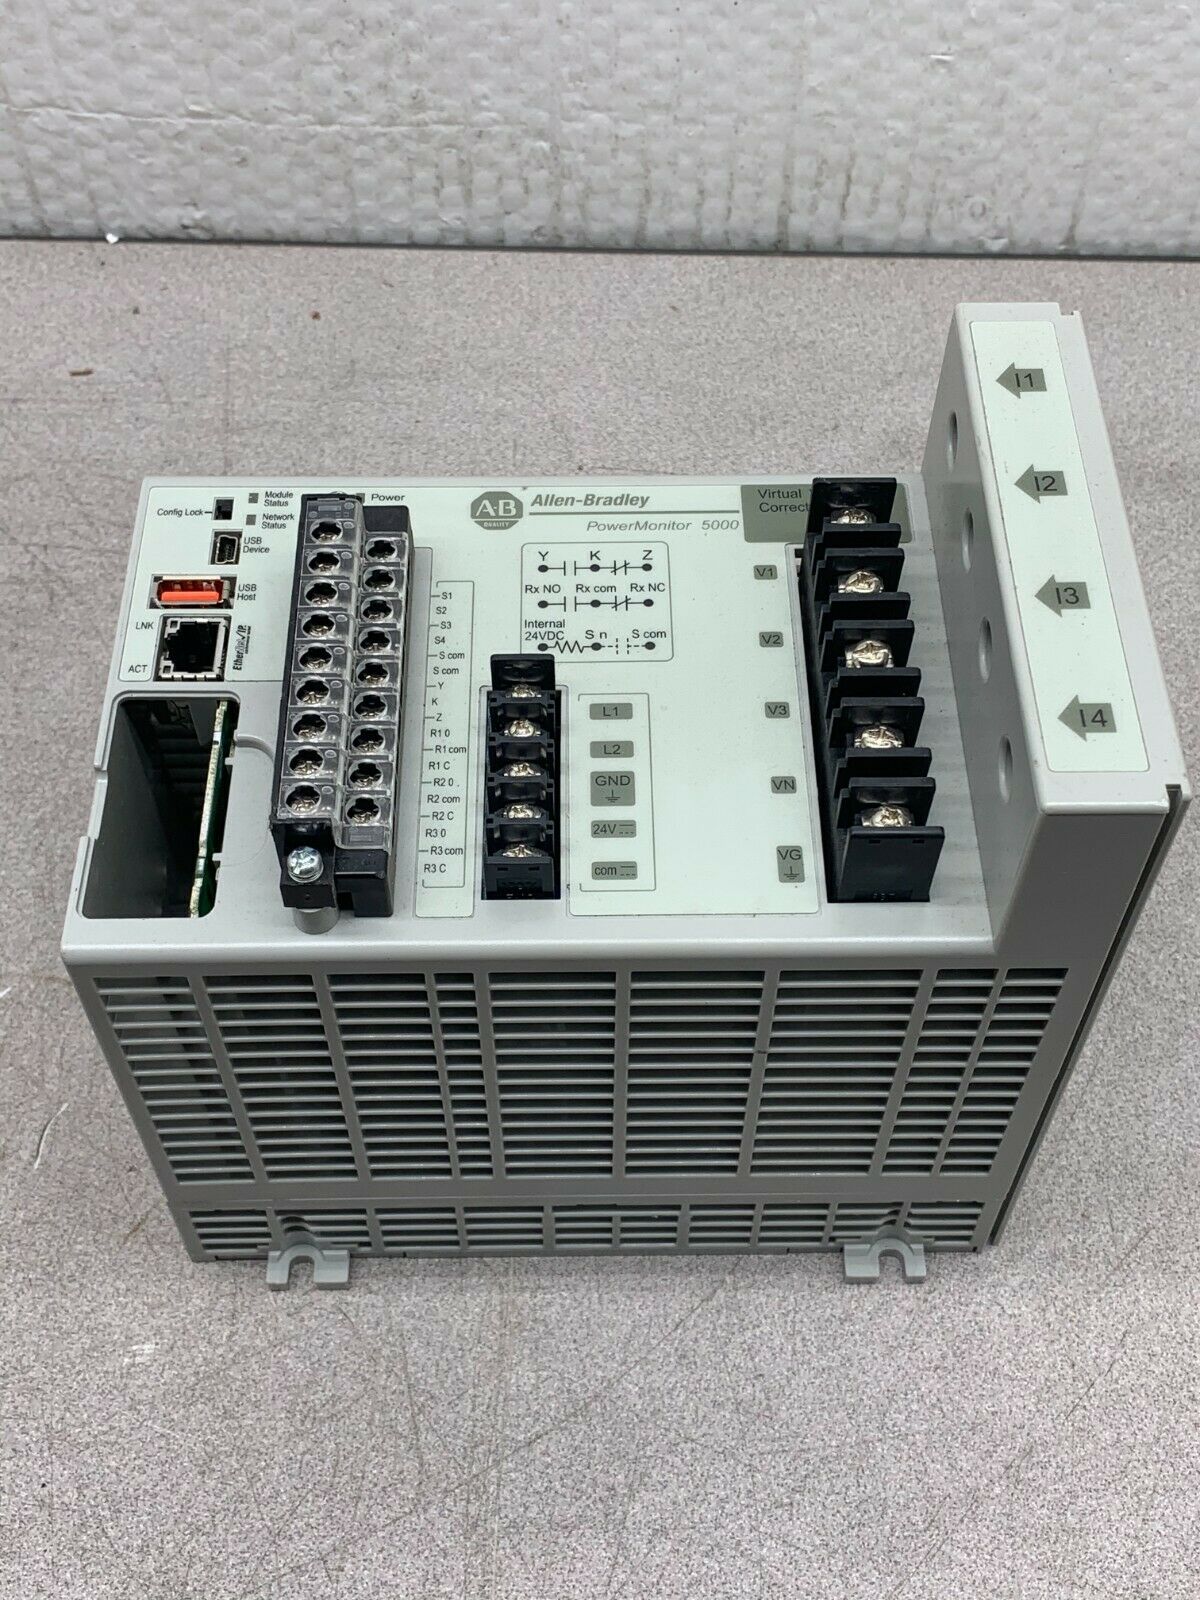 *FOR PARTS NOT WORKING* ALLEN-BRADLEY 5000 POWER MONITOR 1426-M6E SERIES B